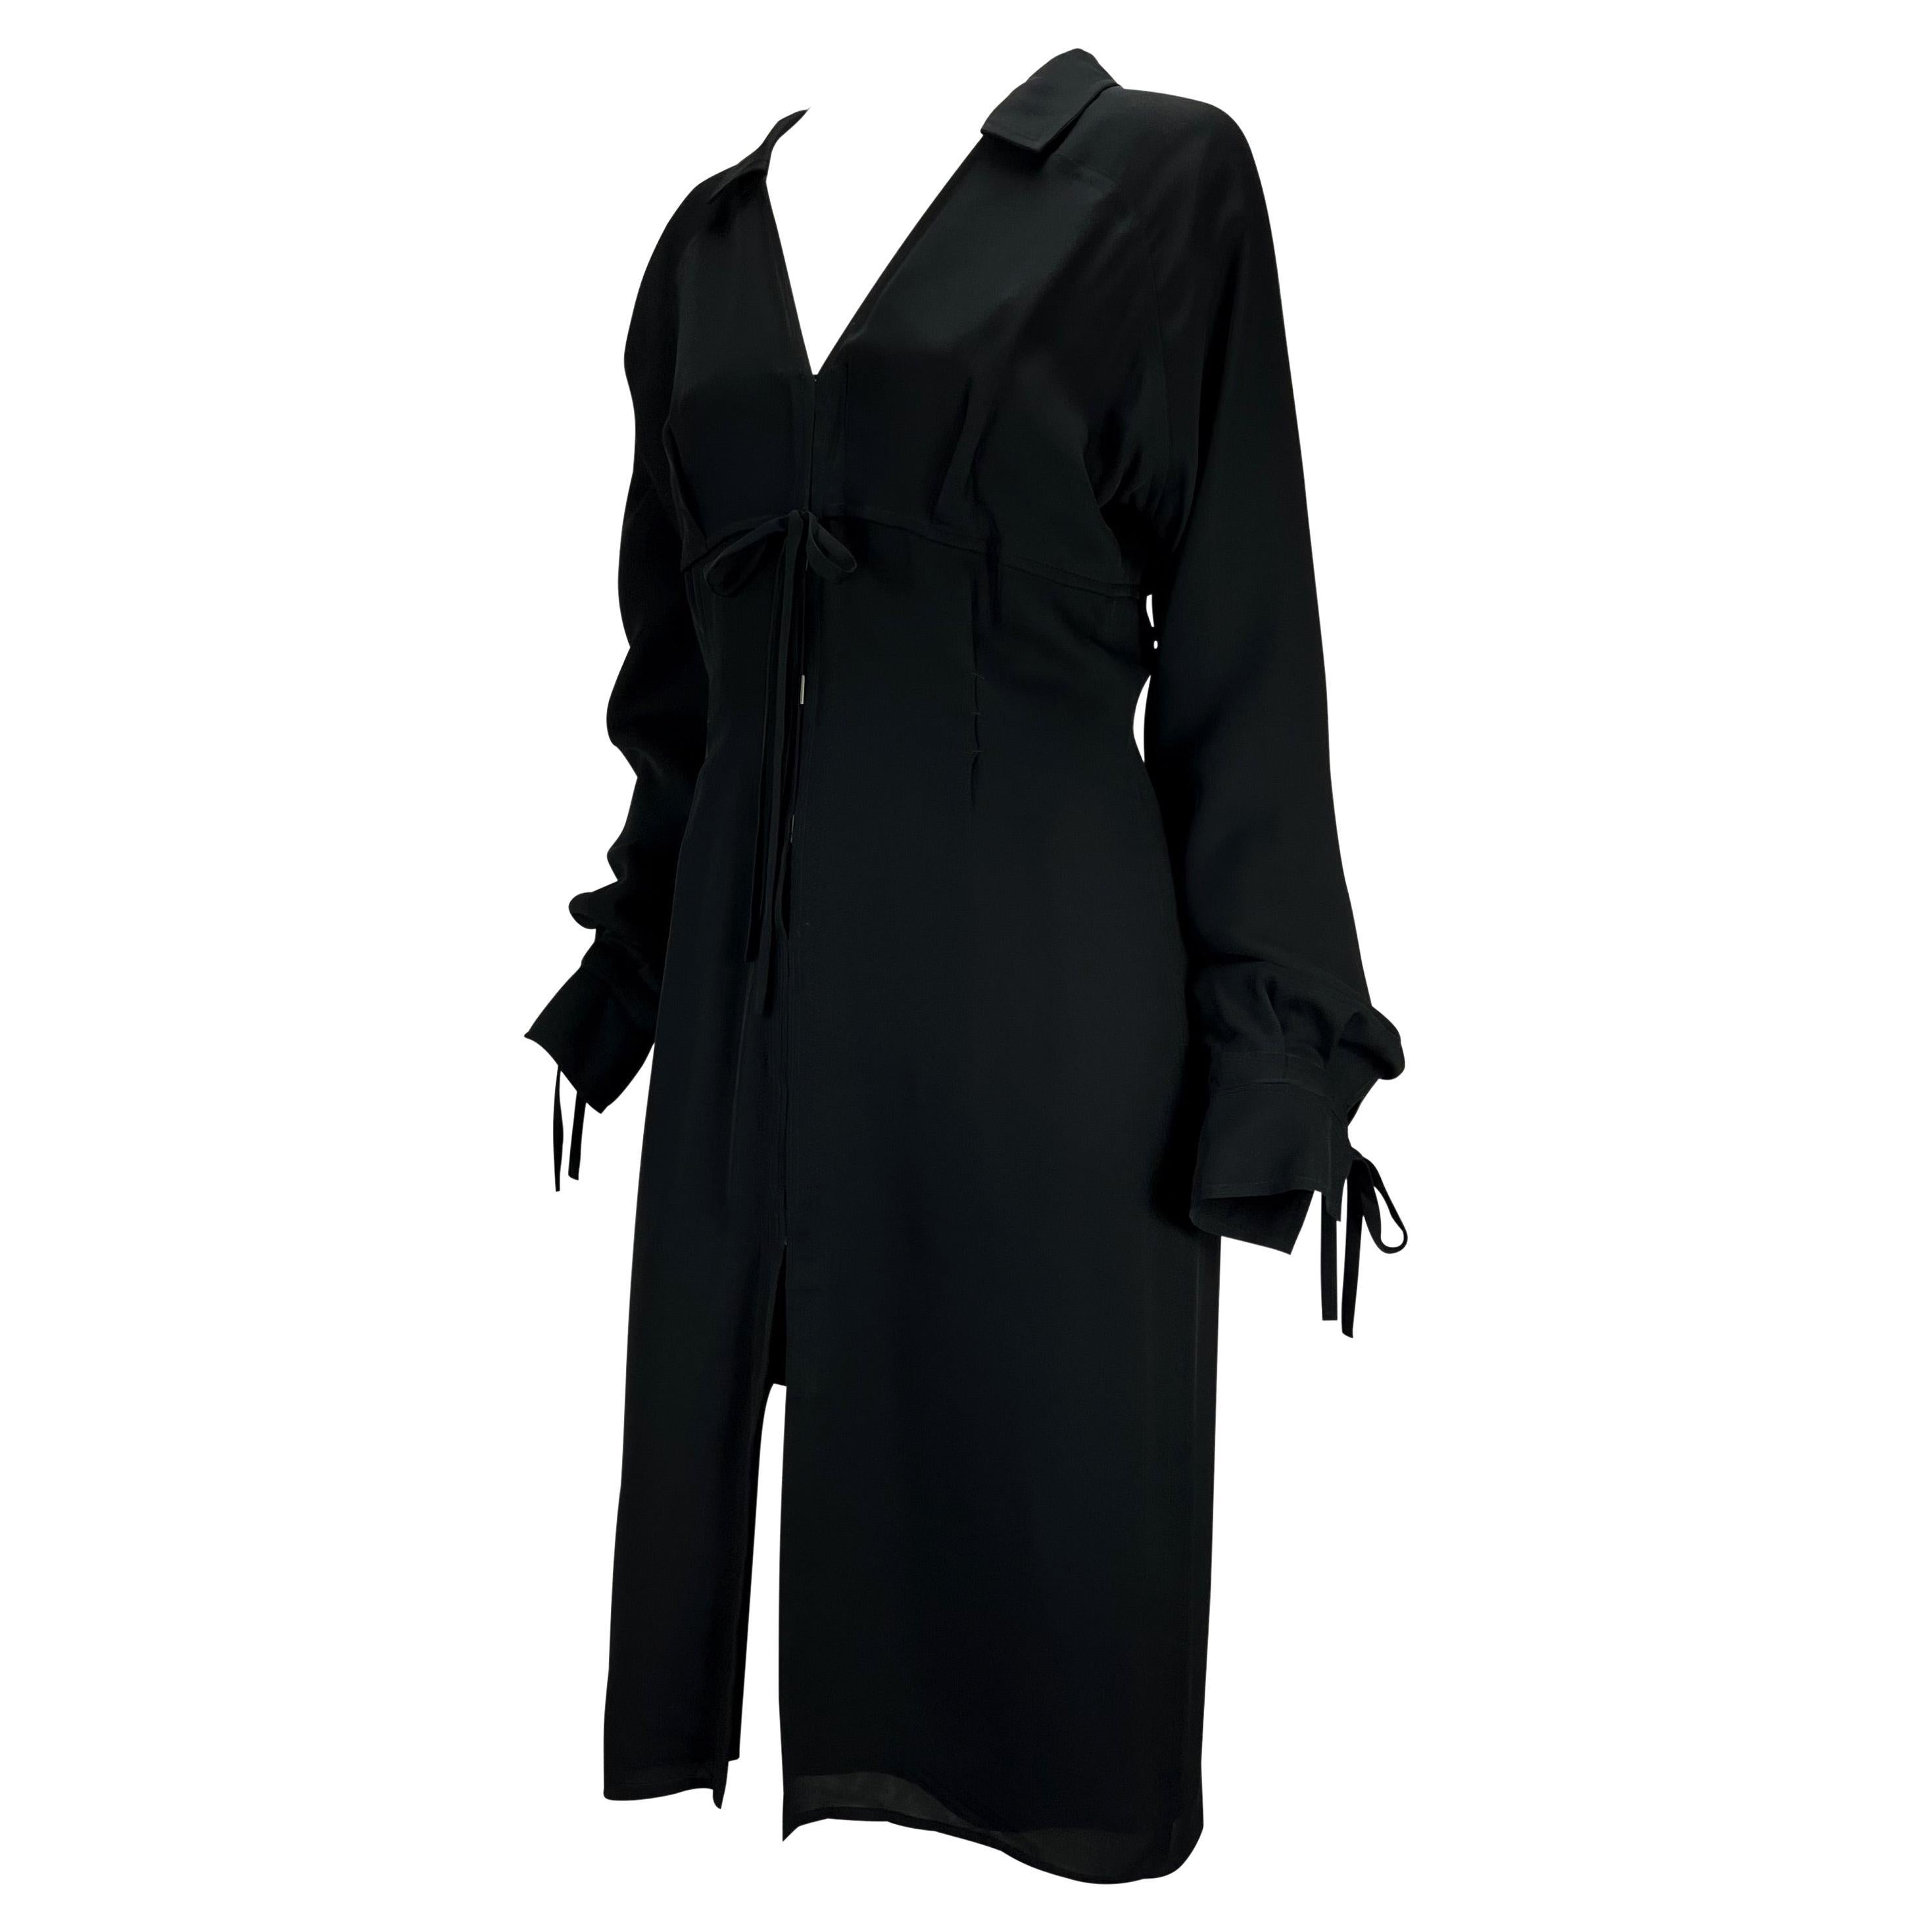 Presenting a black tie-up Yves Saint Laurent Rive Gauche shirt dress, designed by Tom Ford. From the Fall/Winter 2001 collection, this collared shirt dress features v-neckline, rectangular hook closures at the front, and ties at the bust and cuffs.